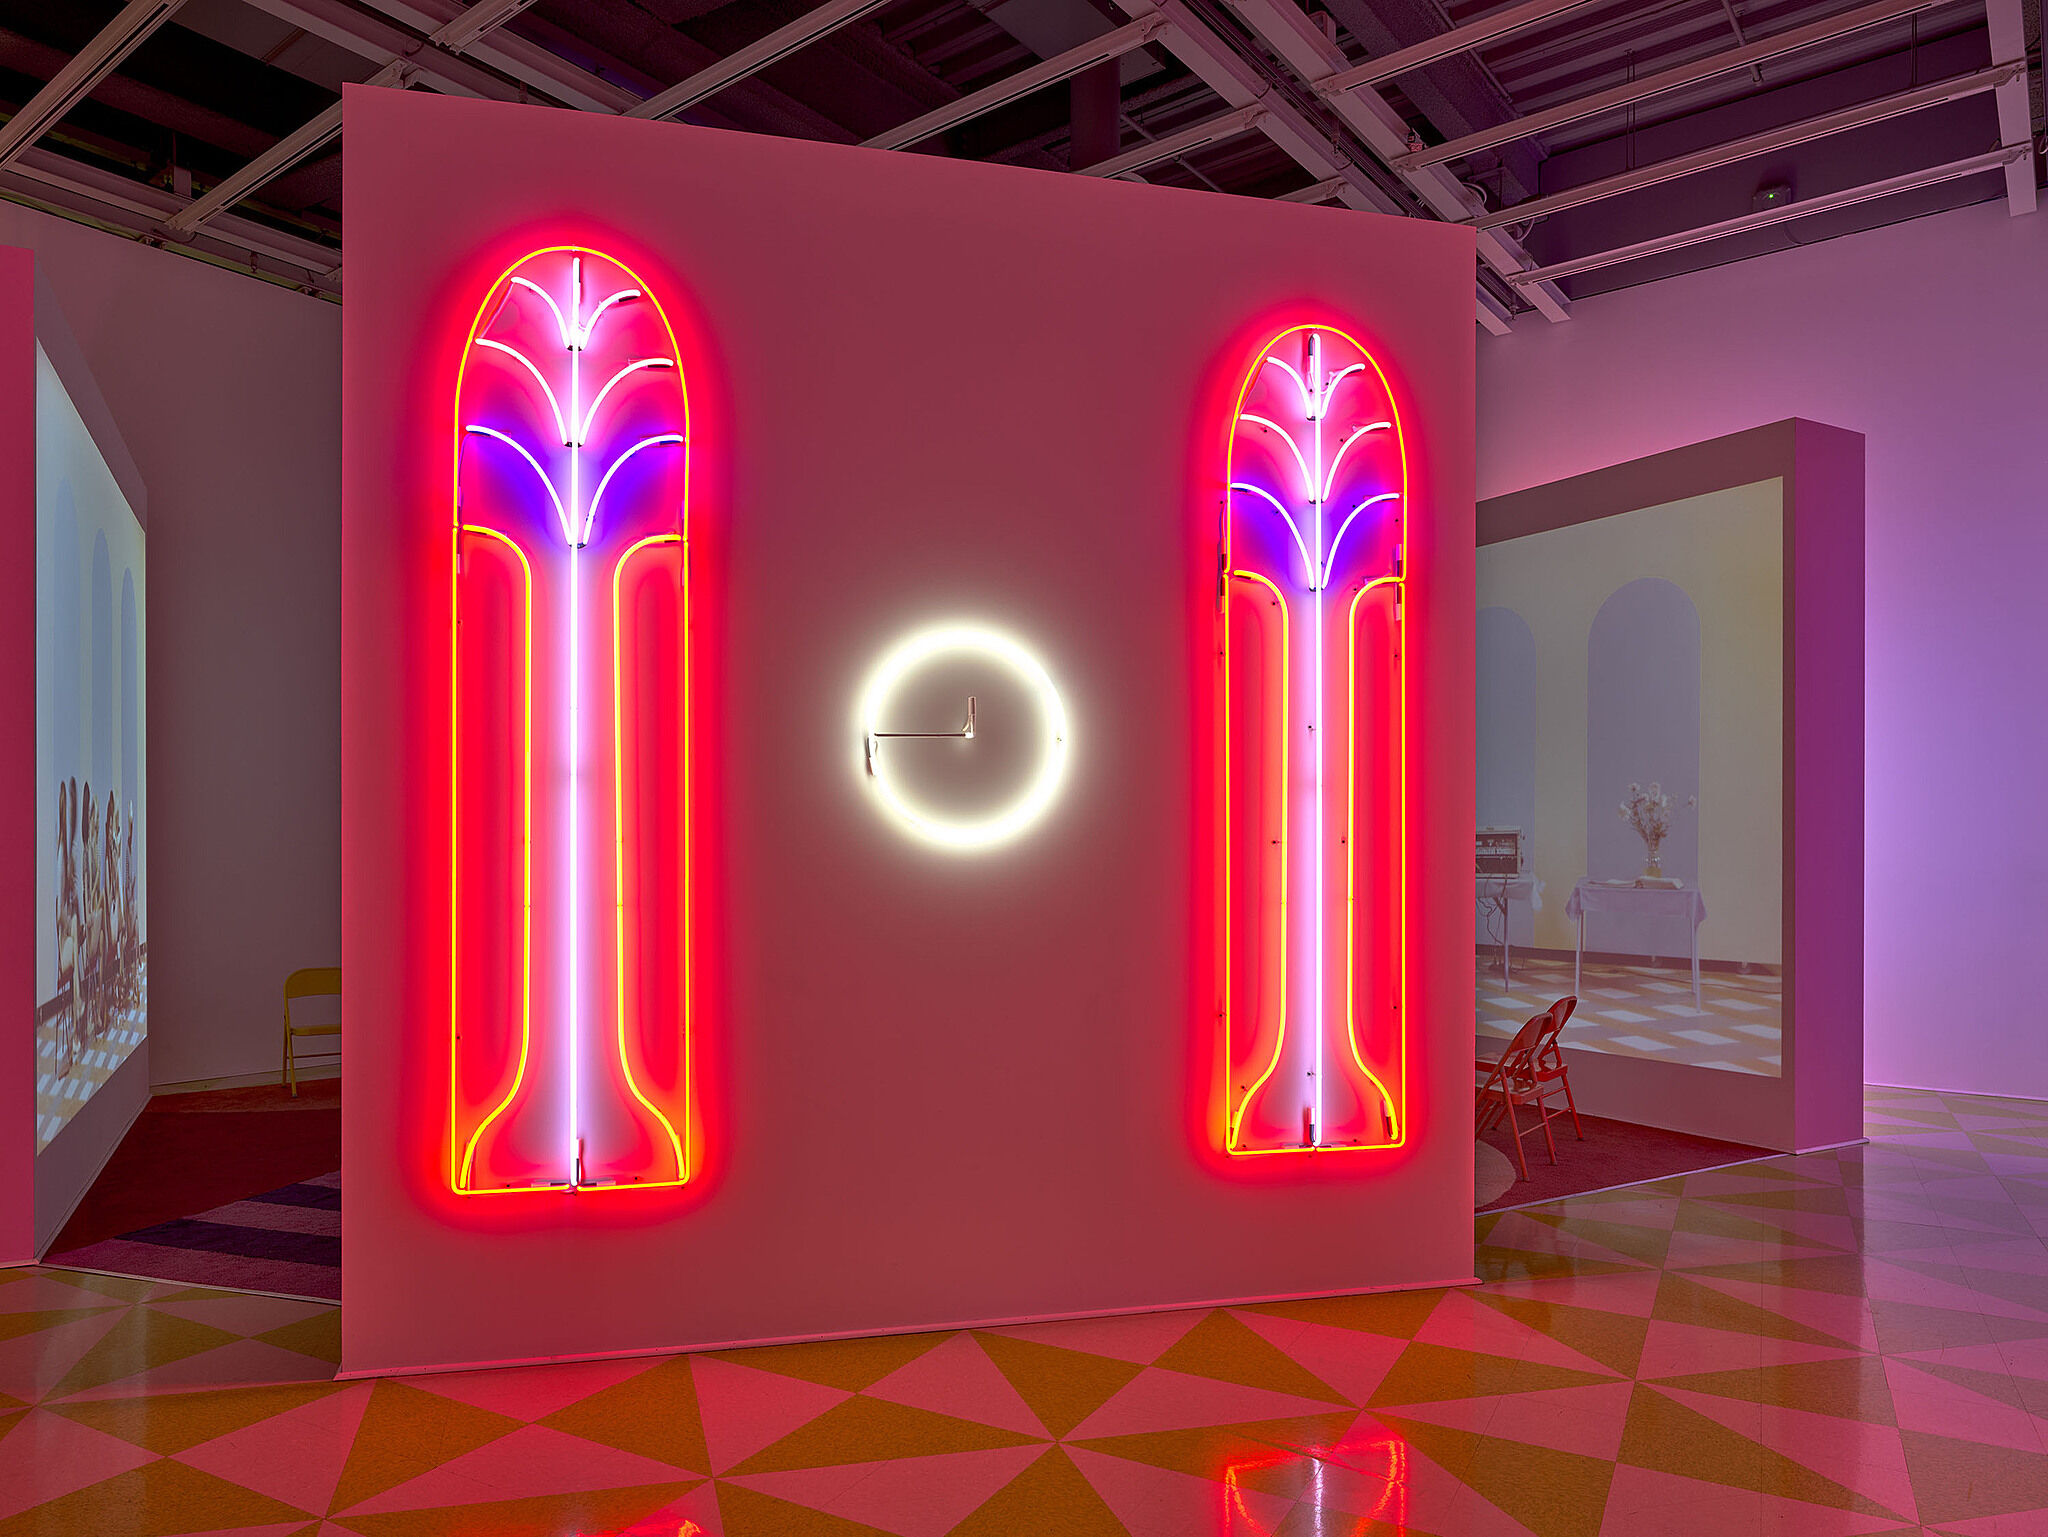 Two pink, purple and red Neon artworks with a yellow clock in the middle of them.